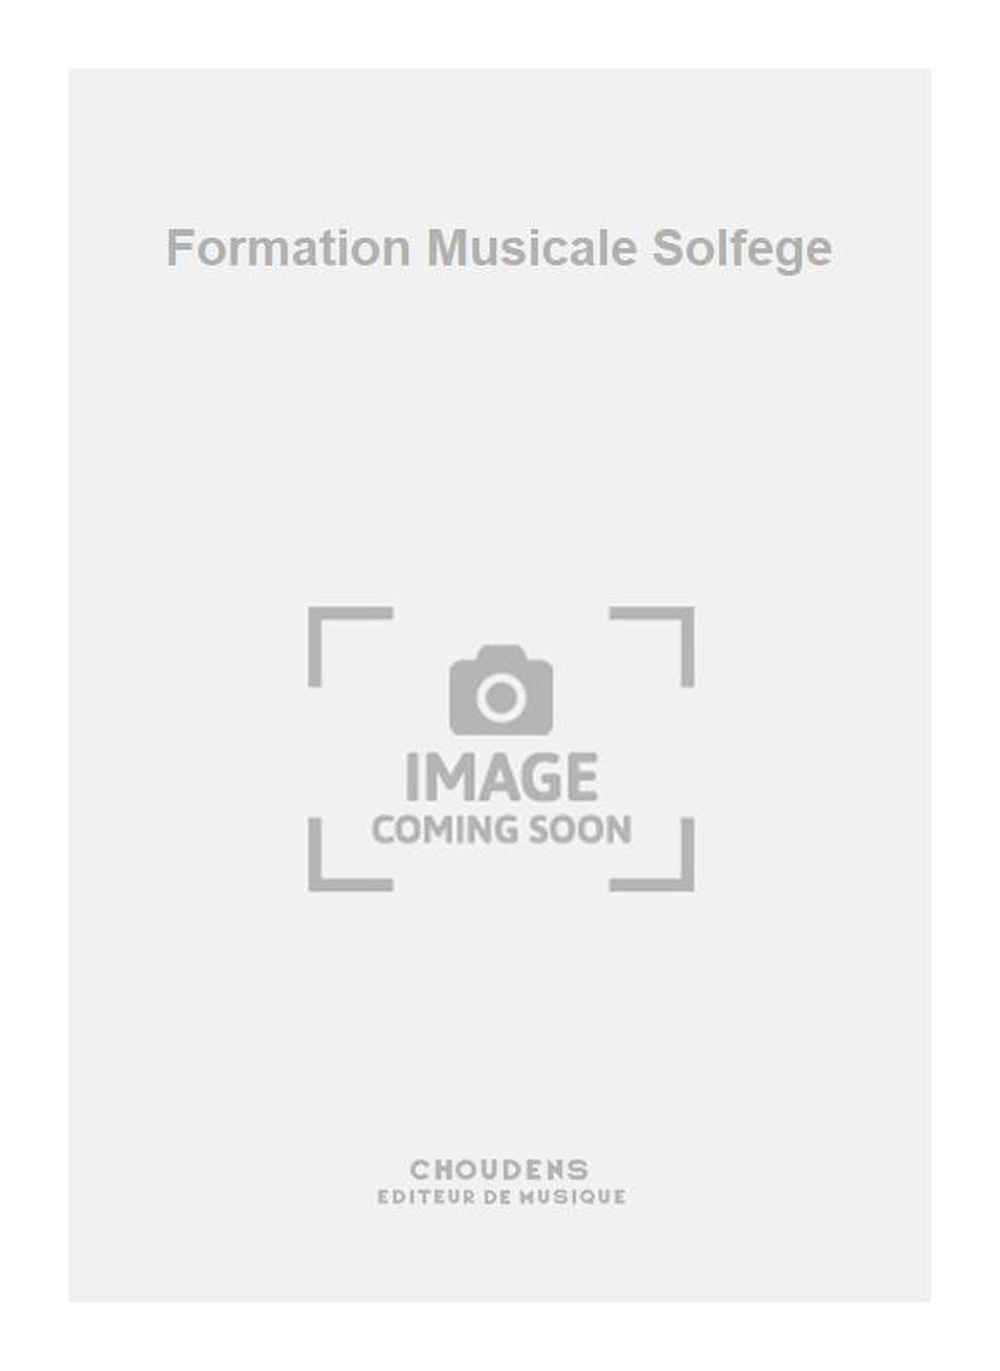 Soubeyran: Formation Musicale Solfege